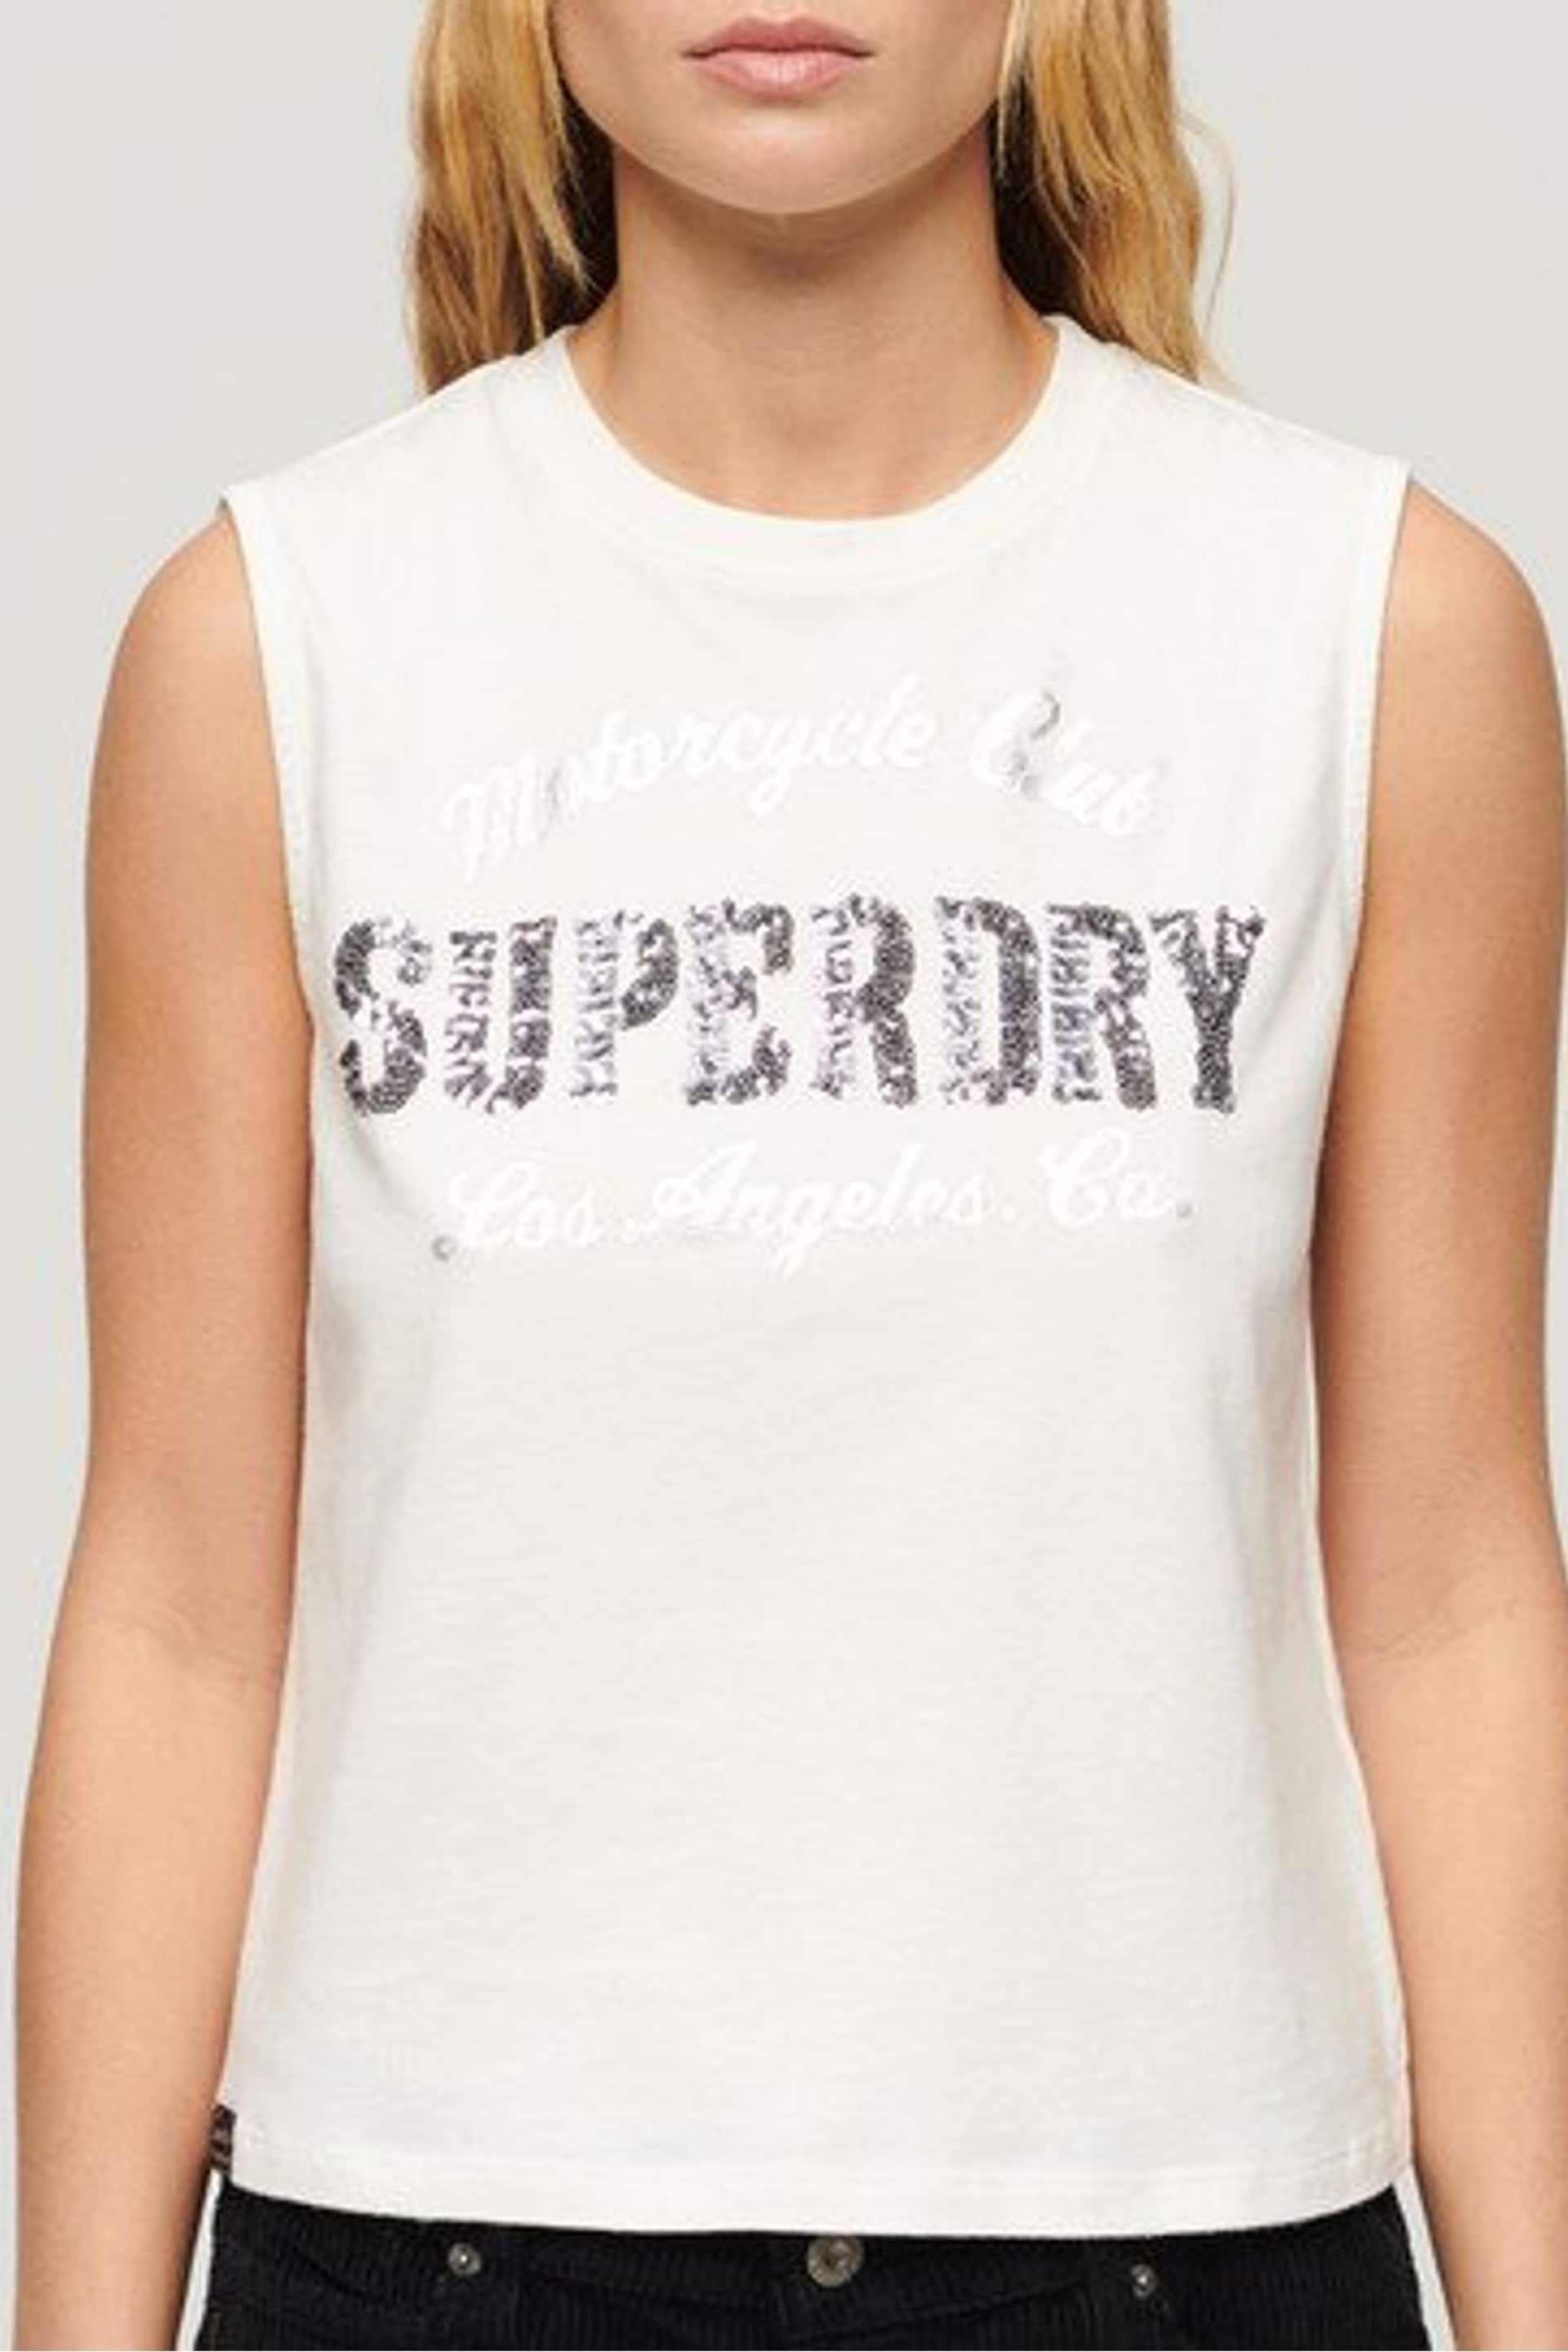 Superdry Cream Embellished Archive Fitted Tank Top - Image 3 of 5